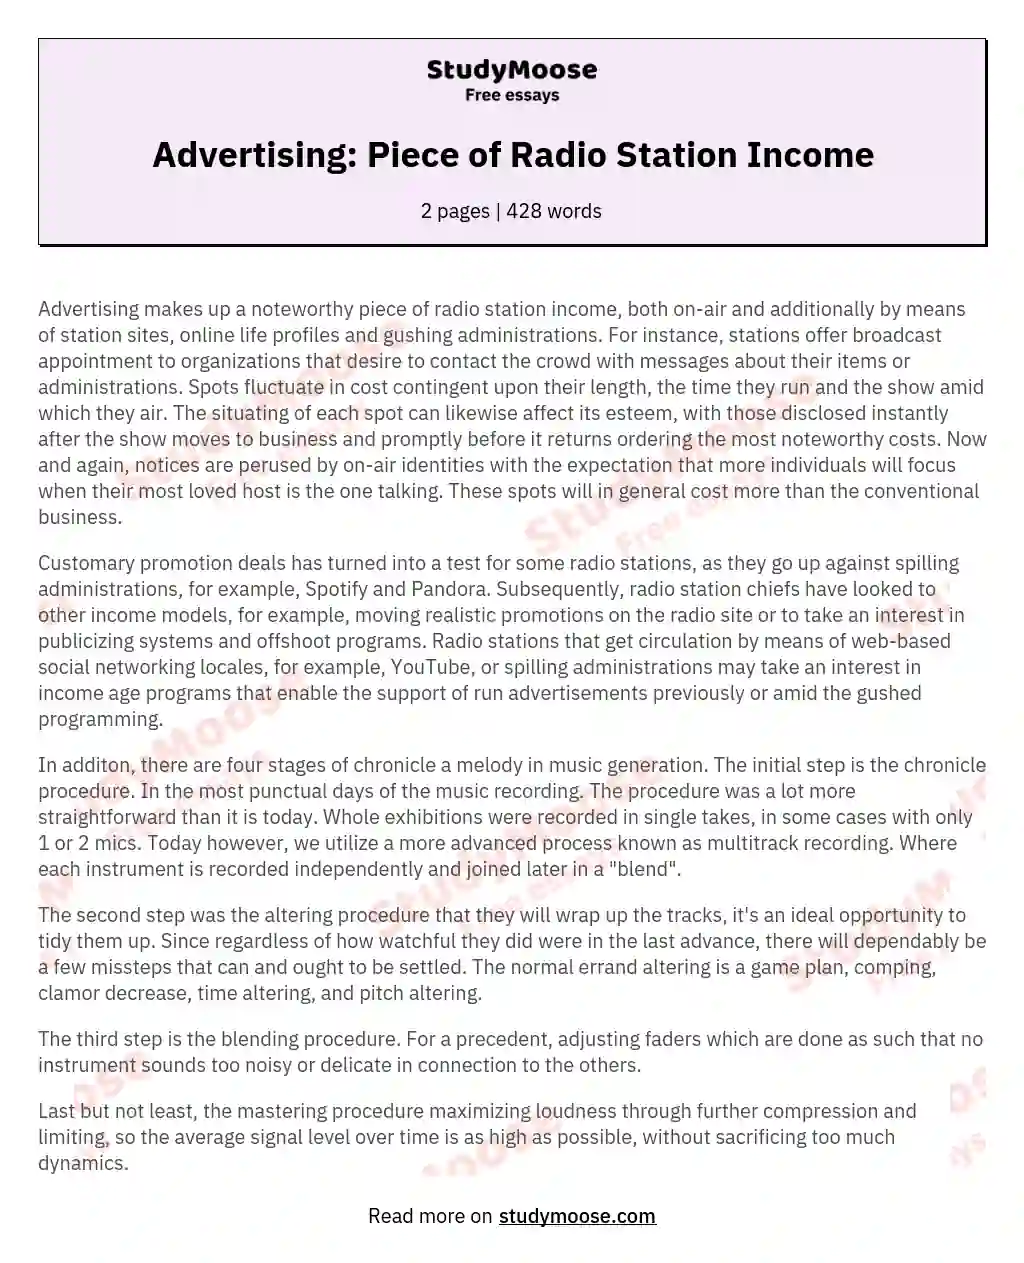 Advertising: Piece of Radio Station Income essay